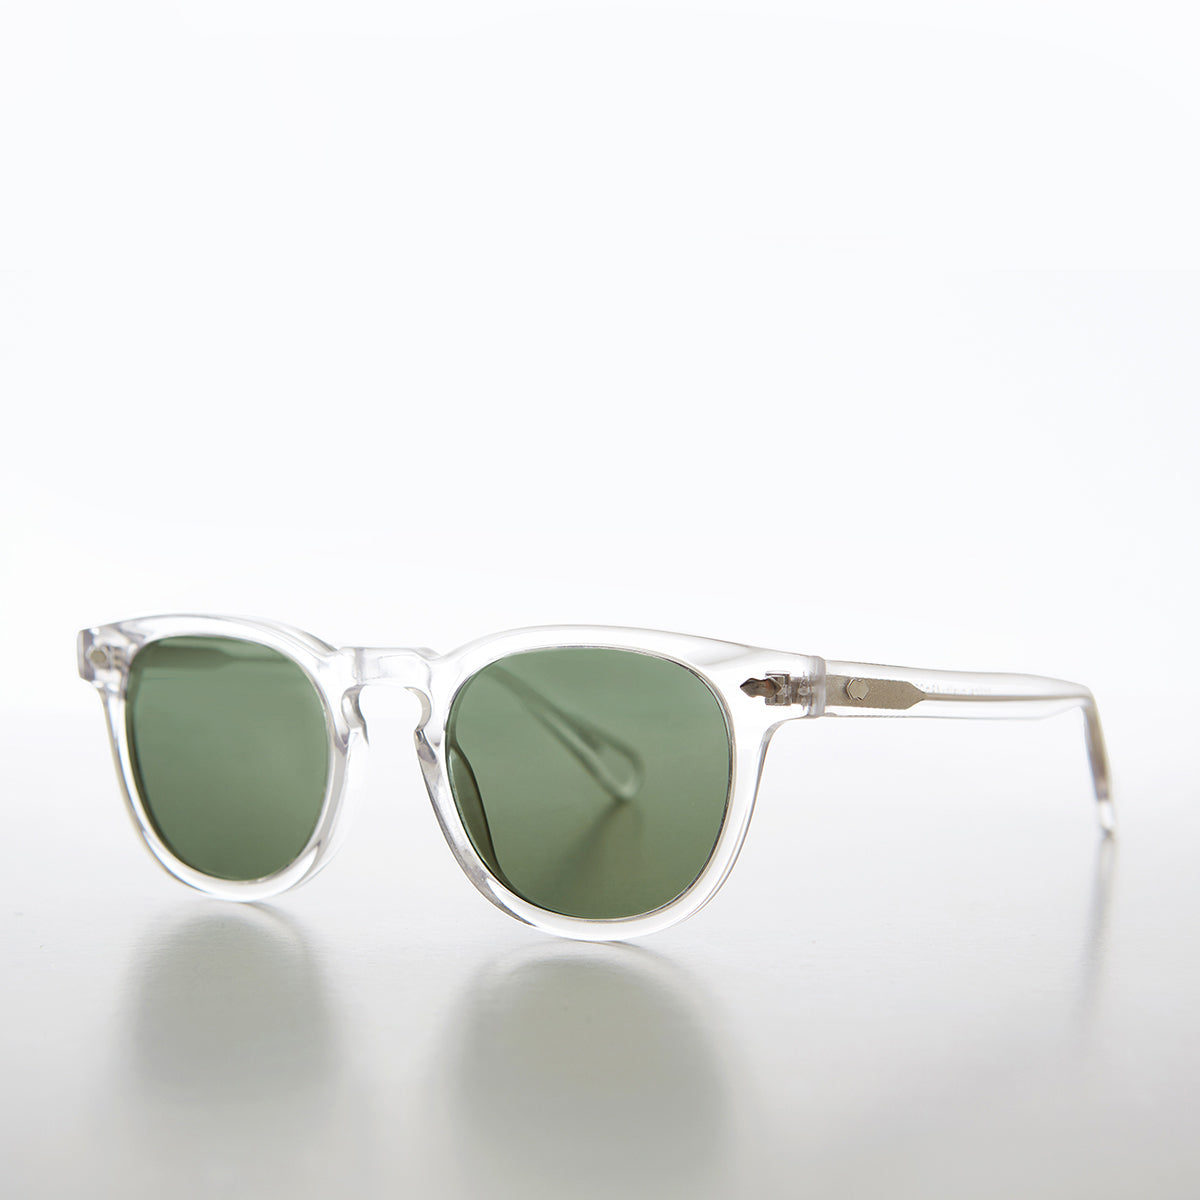 Tiffany Sunglasses in Clear Acetate with Dark Blue Lenses | Tiffany & Co.